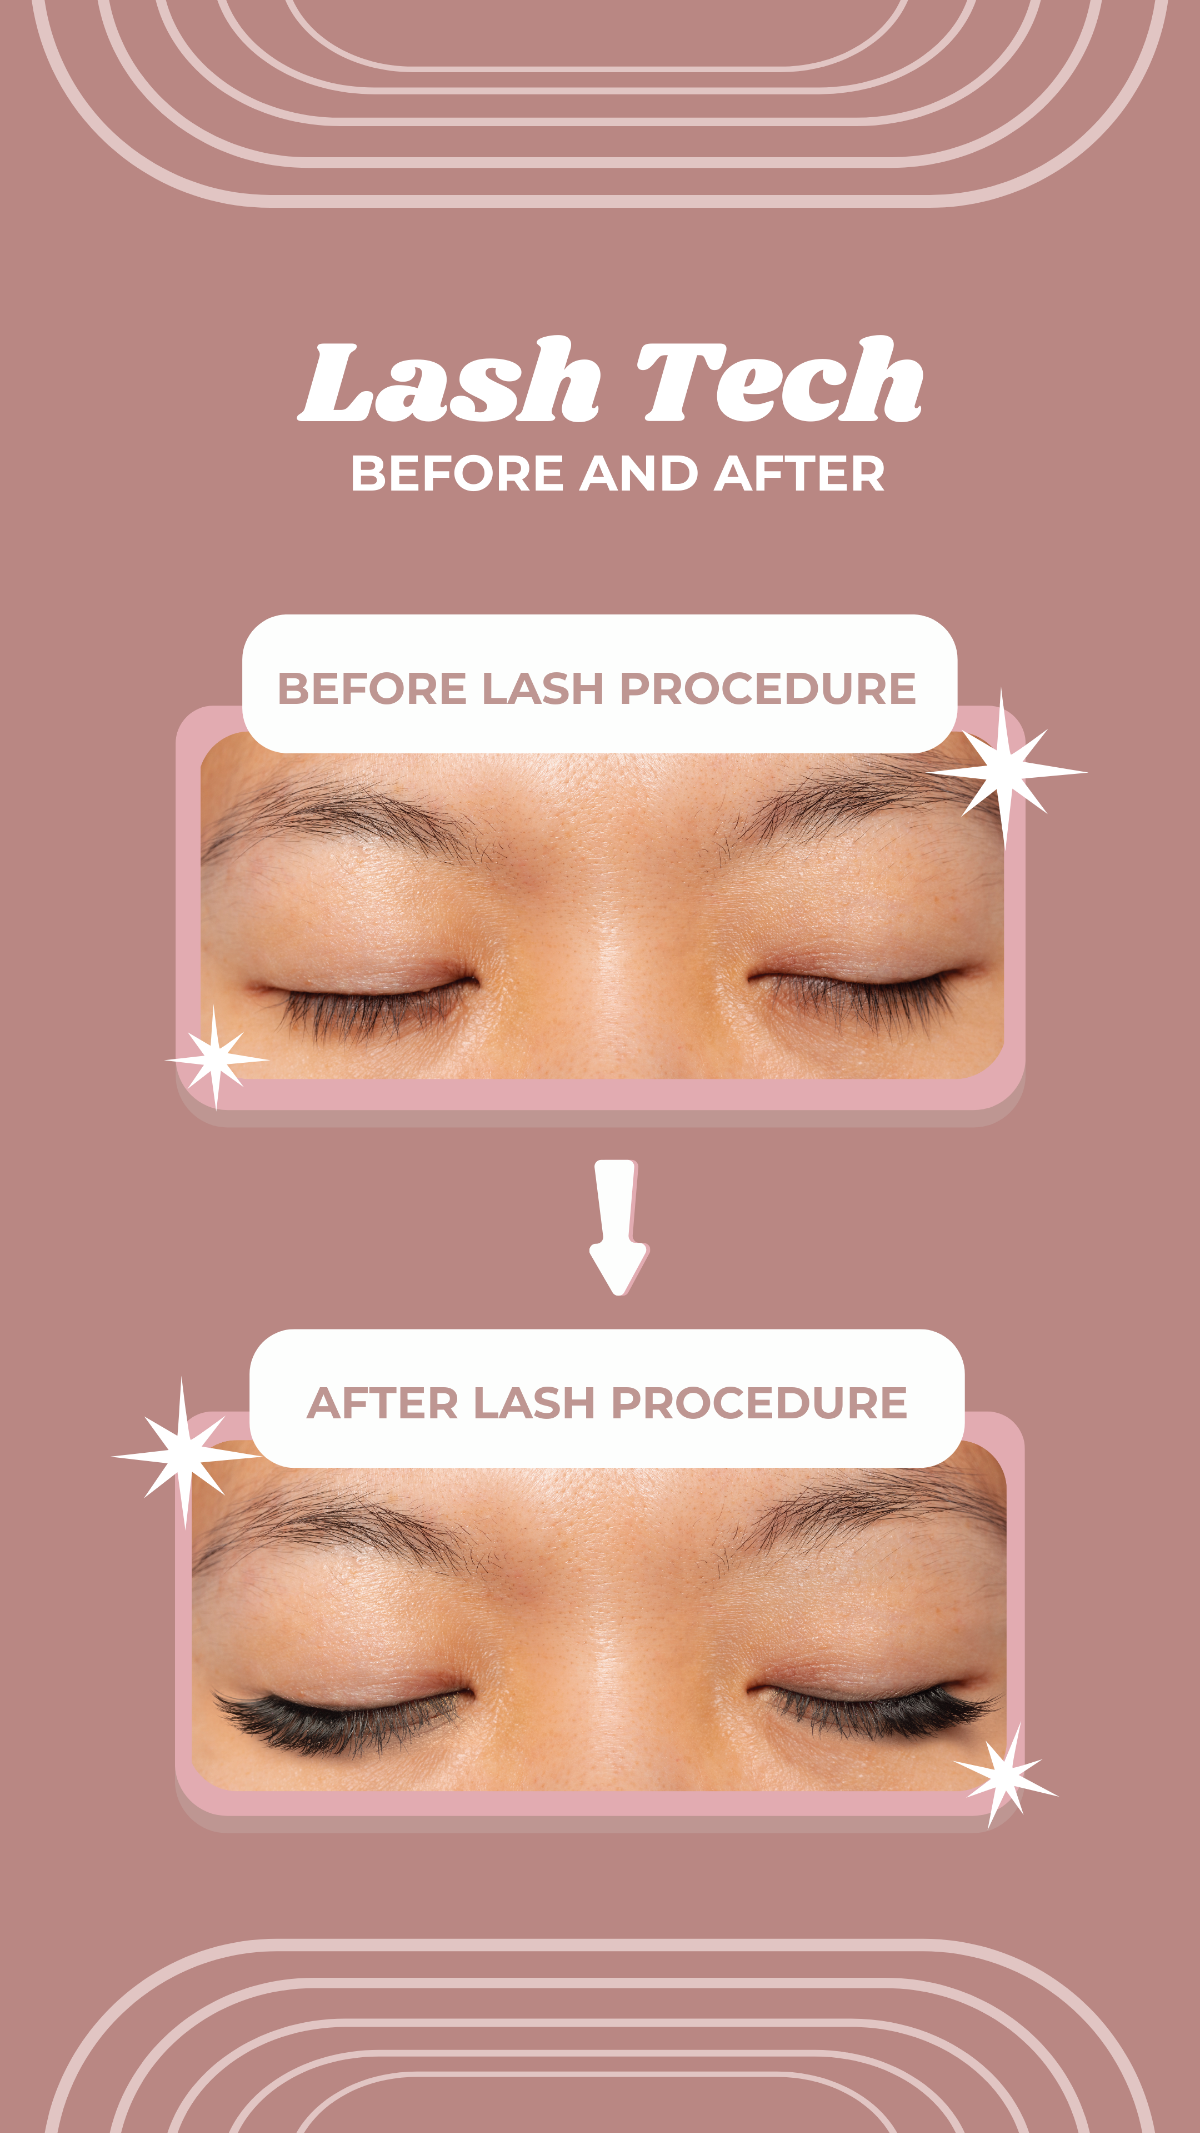 Lash Tech Before and After Instagram Post